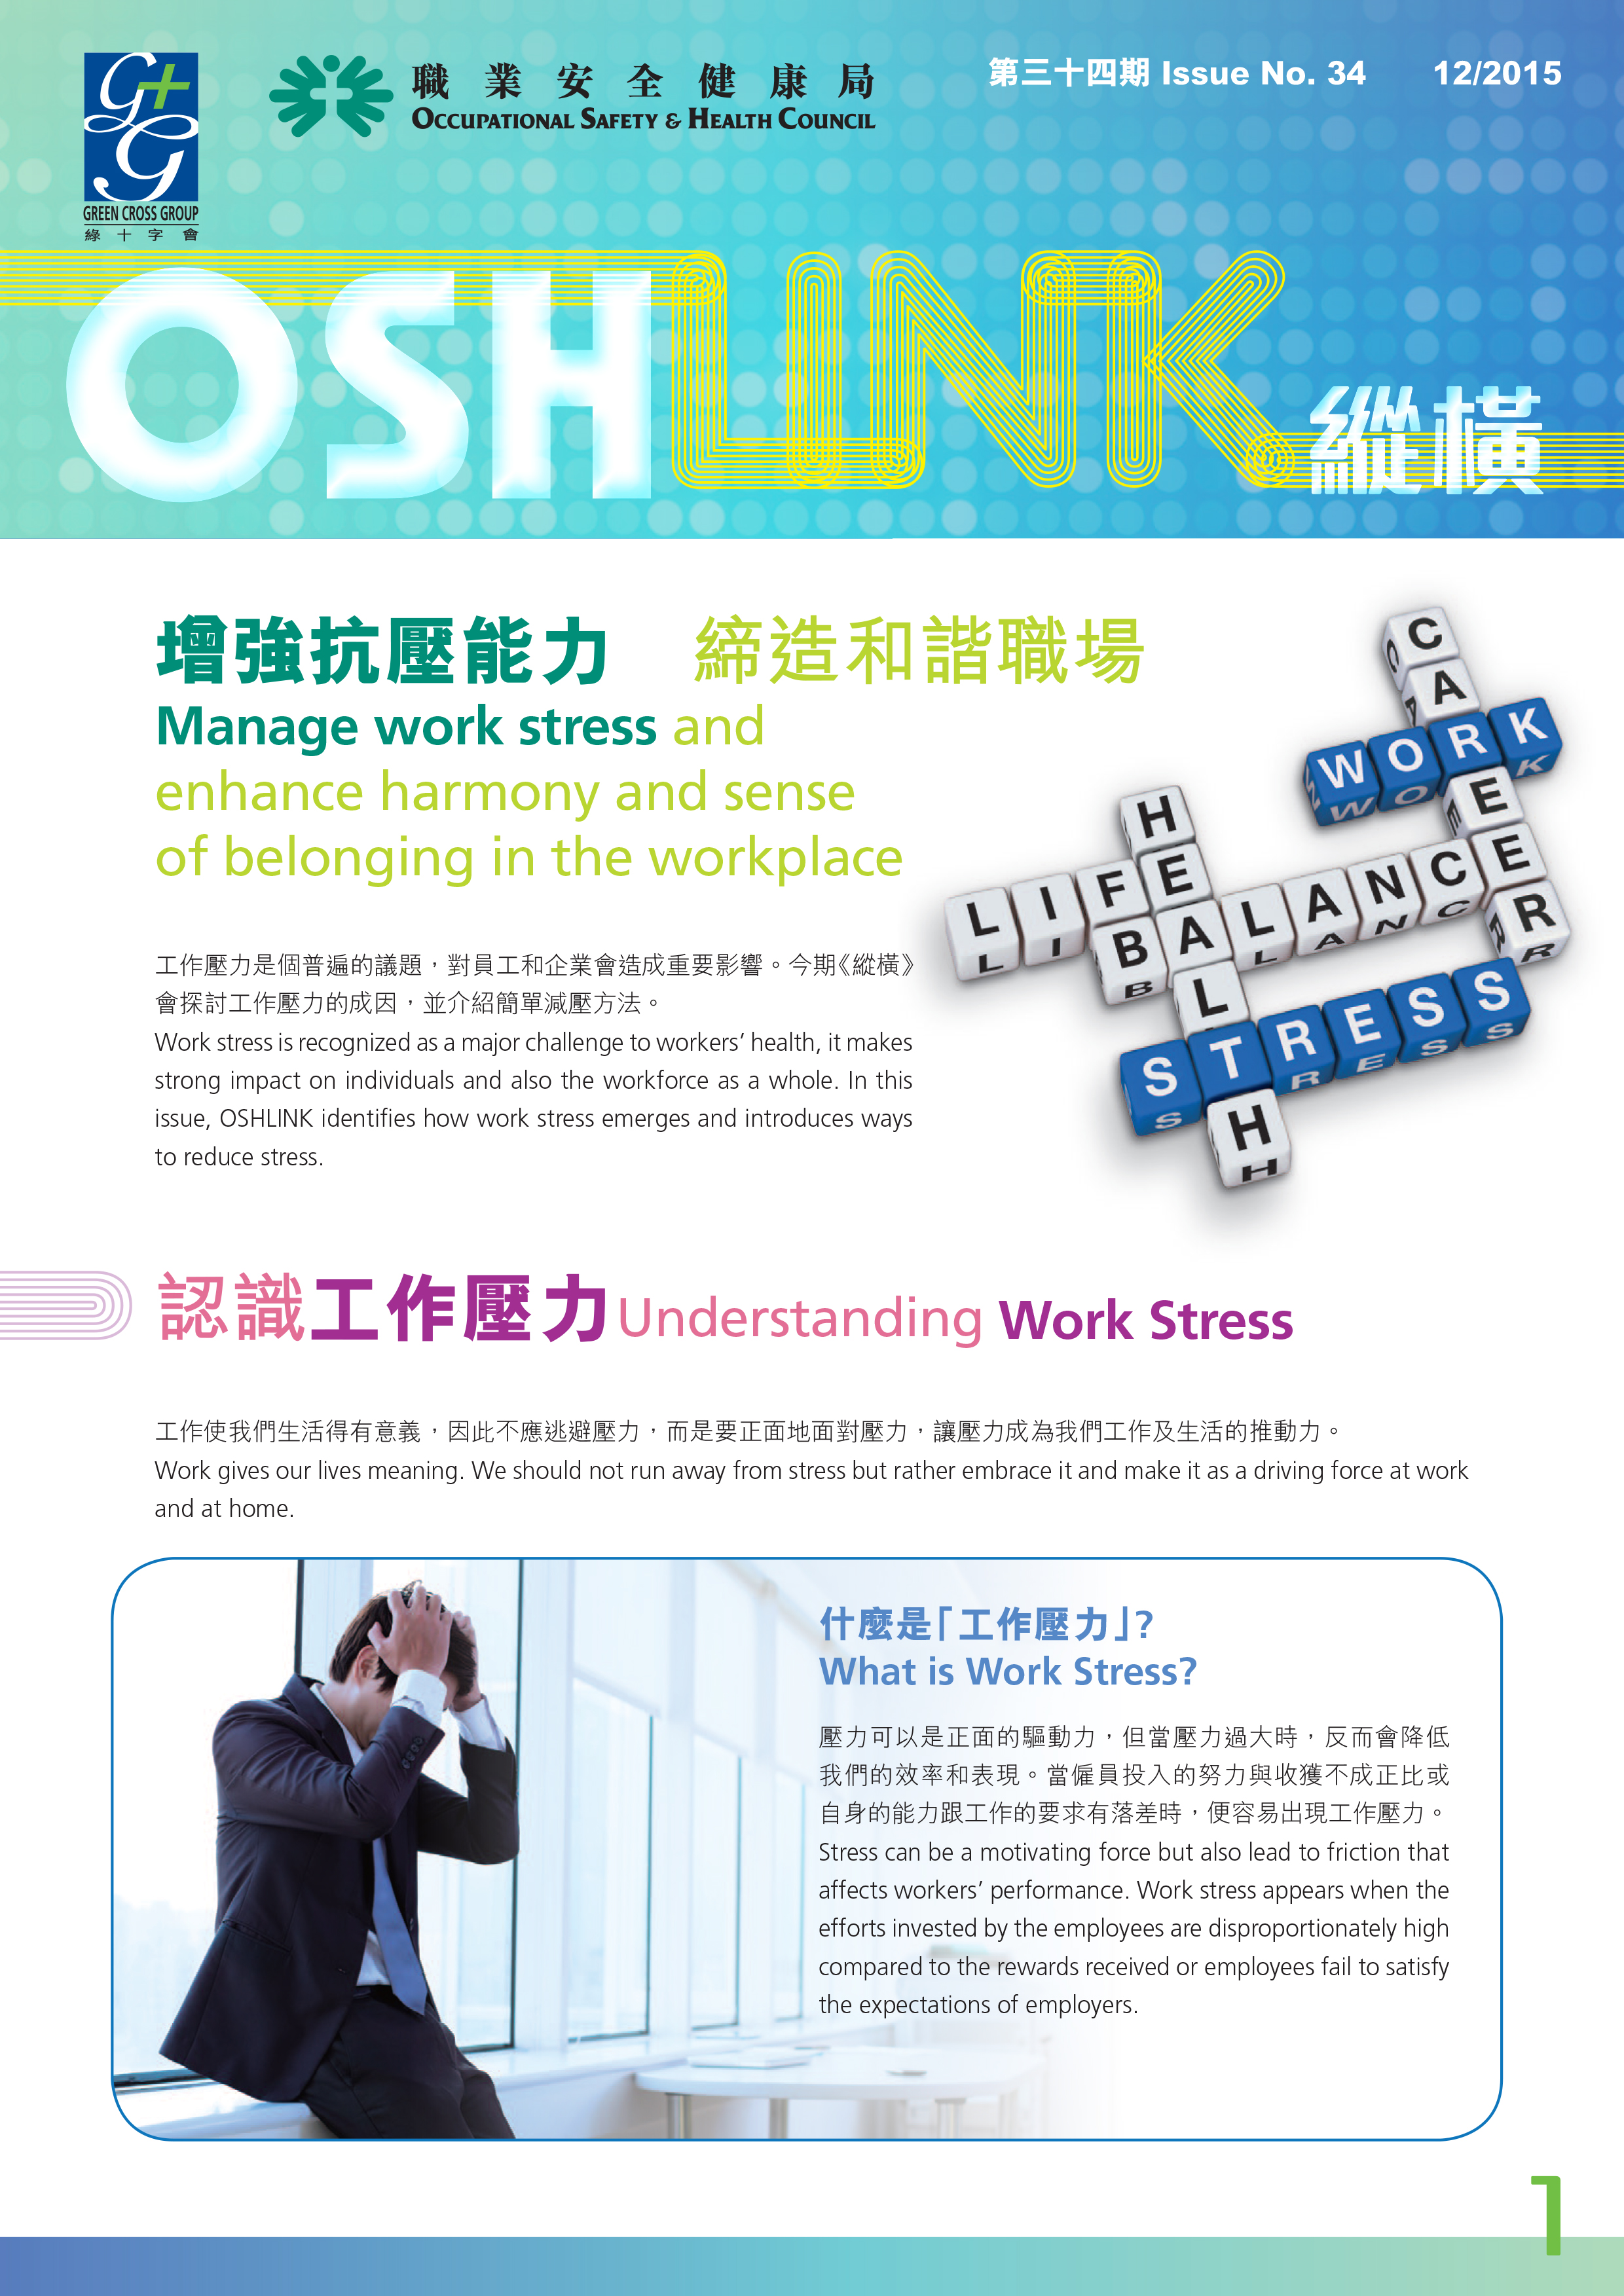 Manage work stress and enhance harmony and sense of belonging in the workplace (published by OSHC)